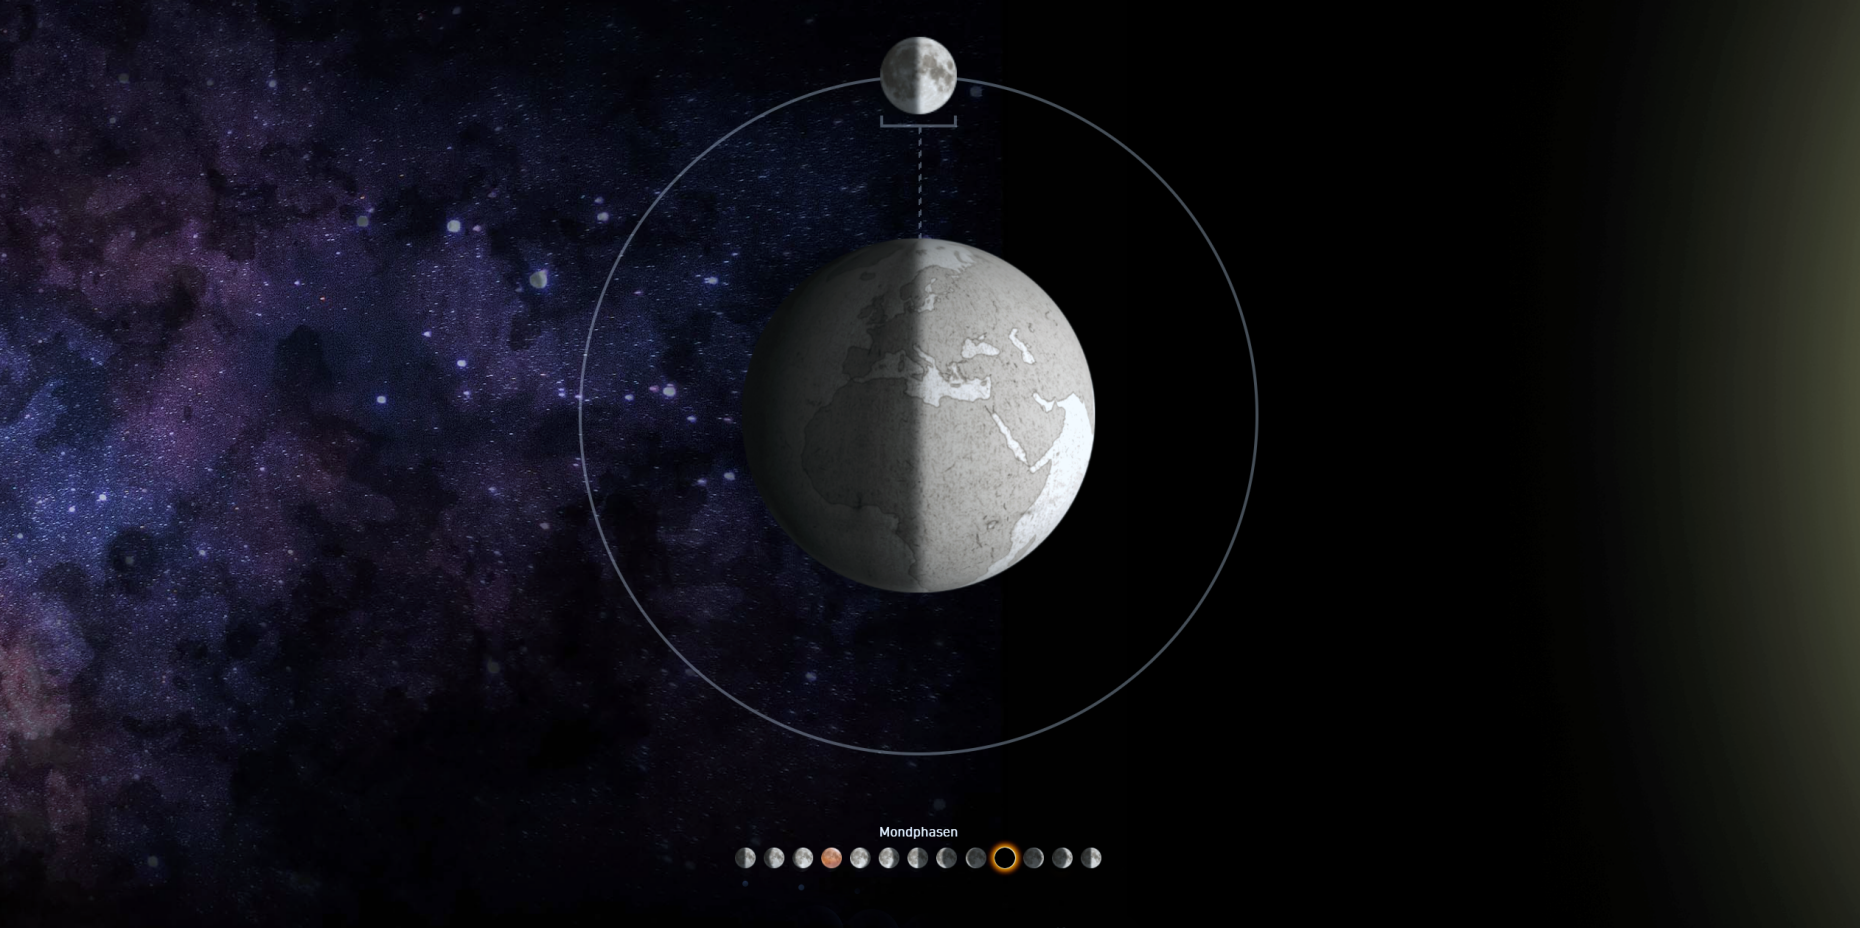 Interactively experience celestial events with AstroRara